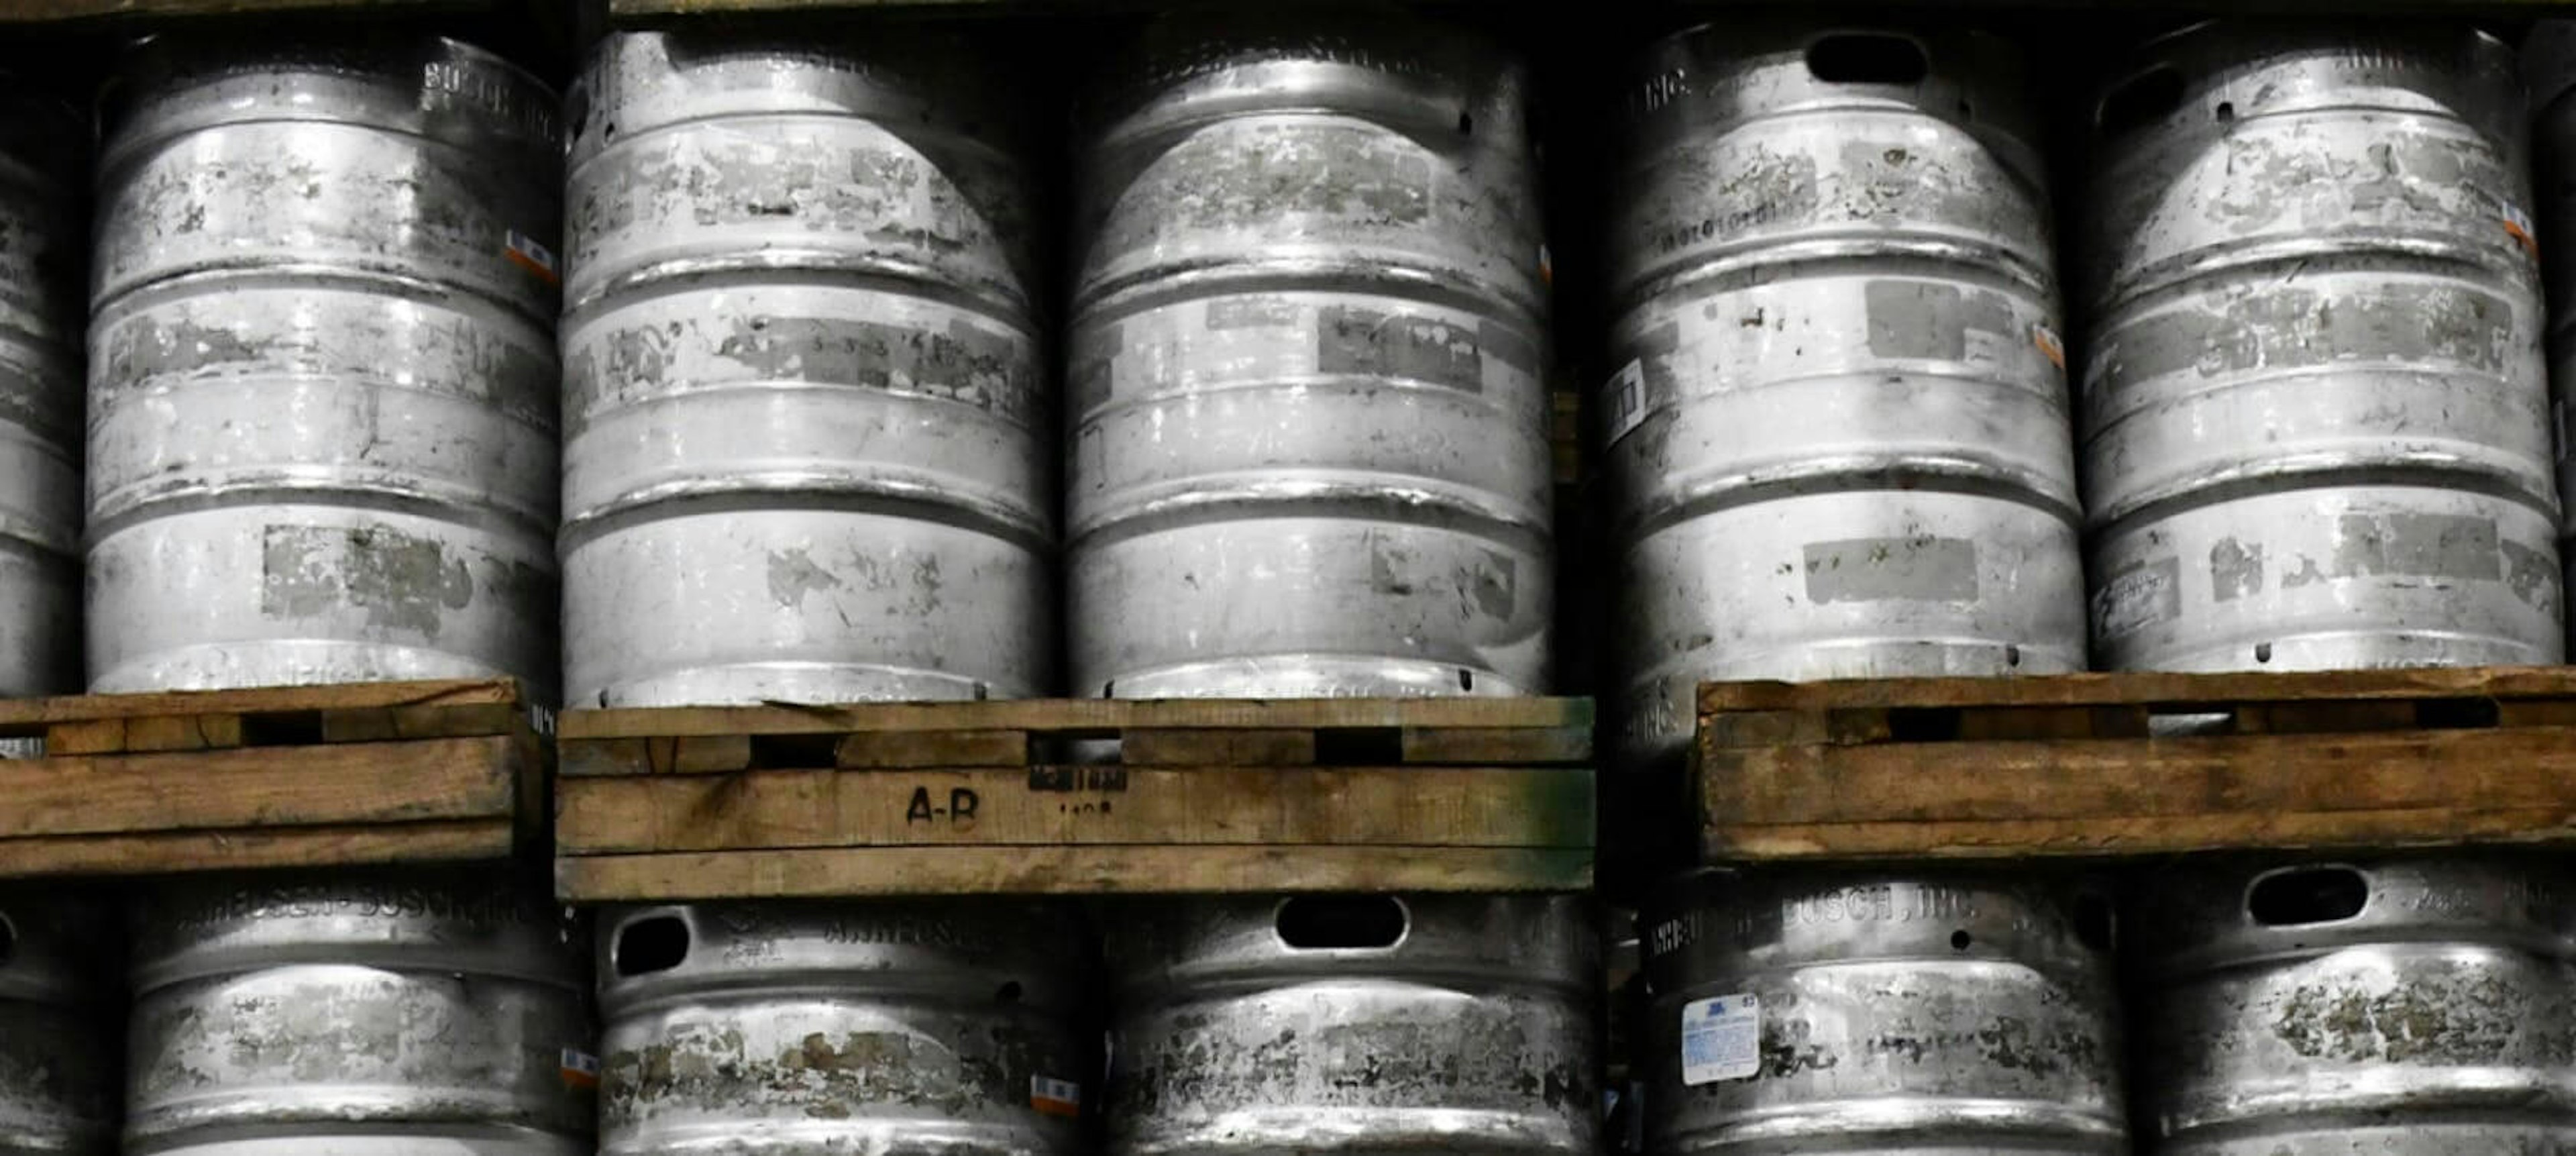 kegs on pallets ready for delivery